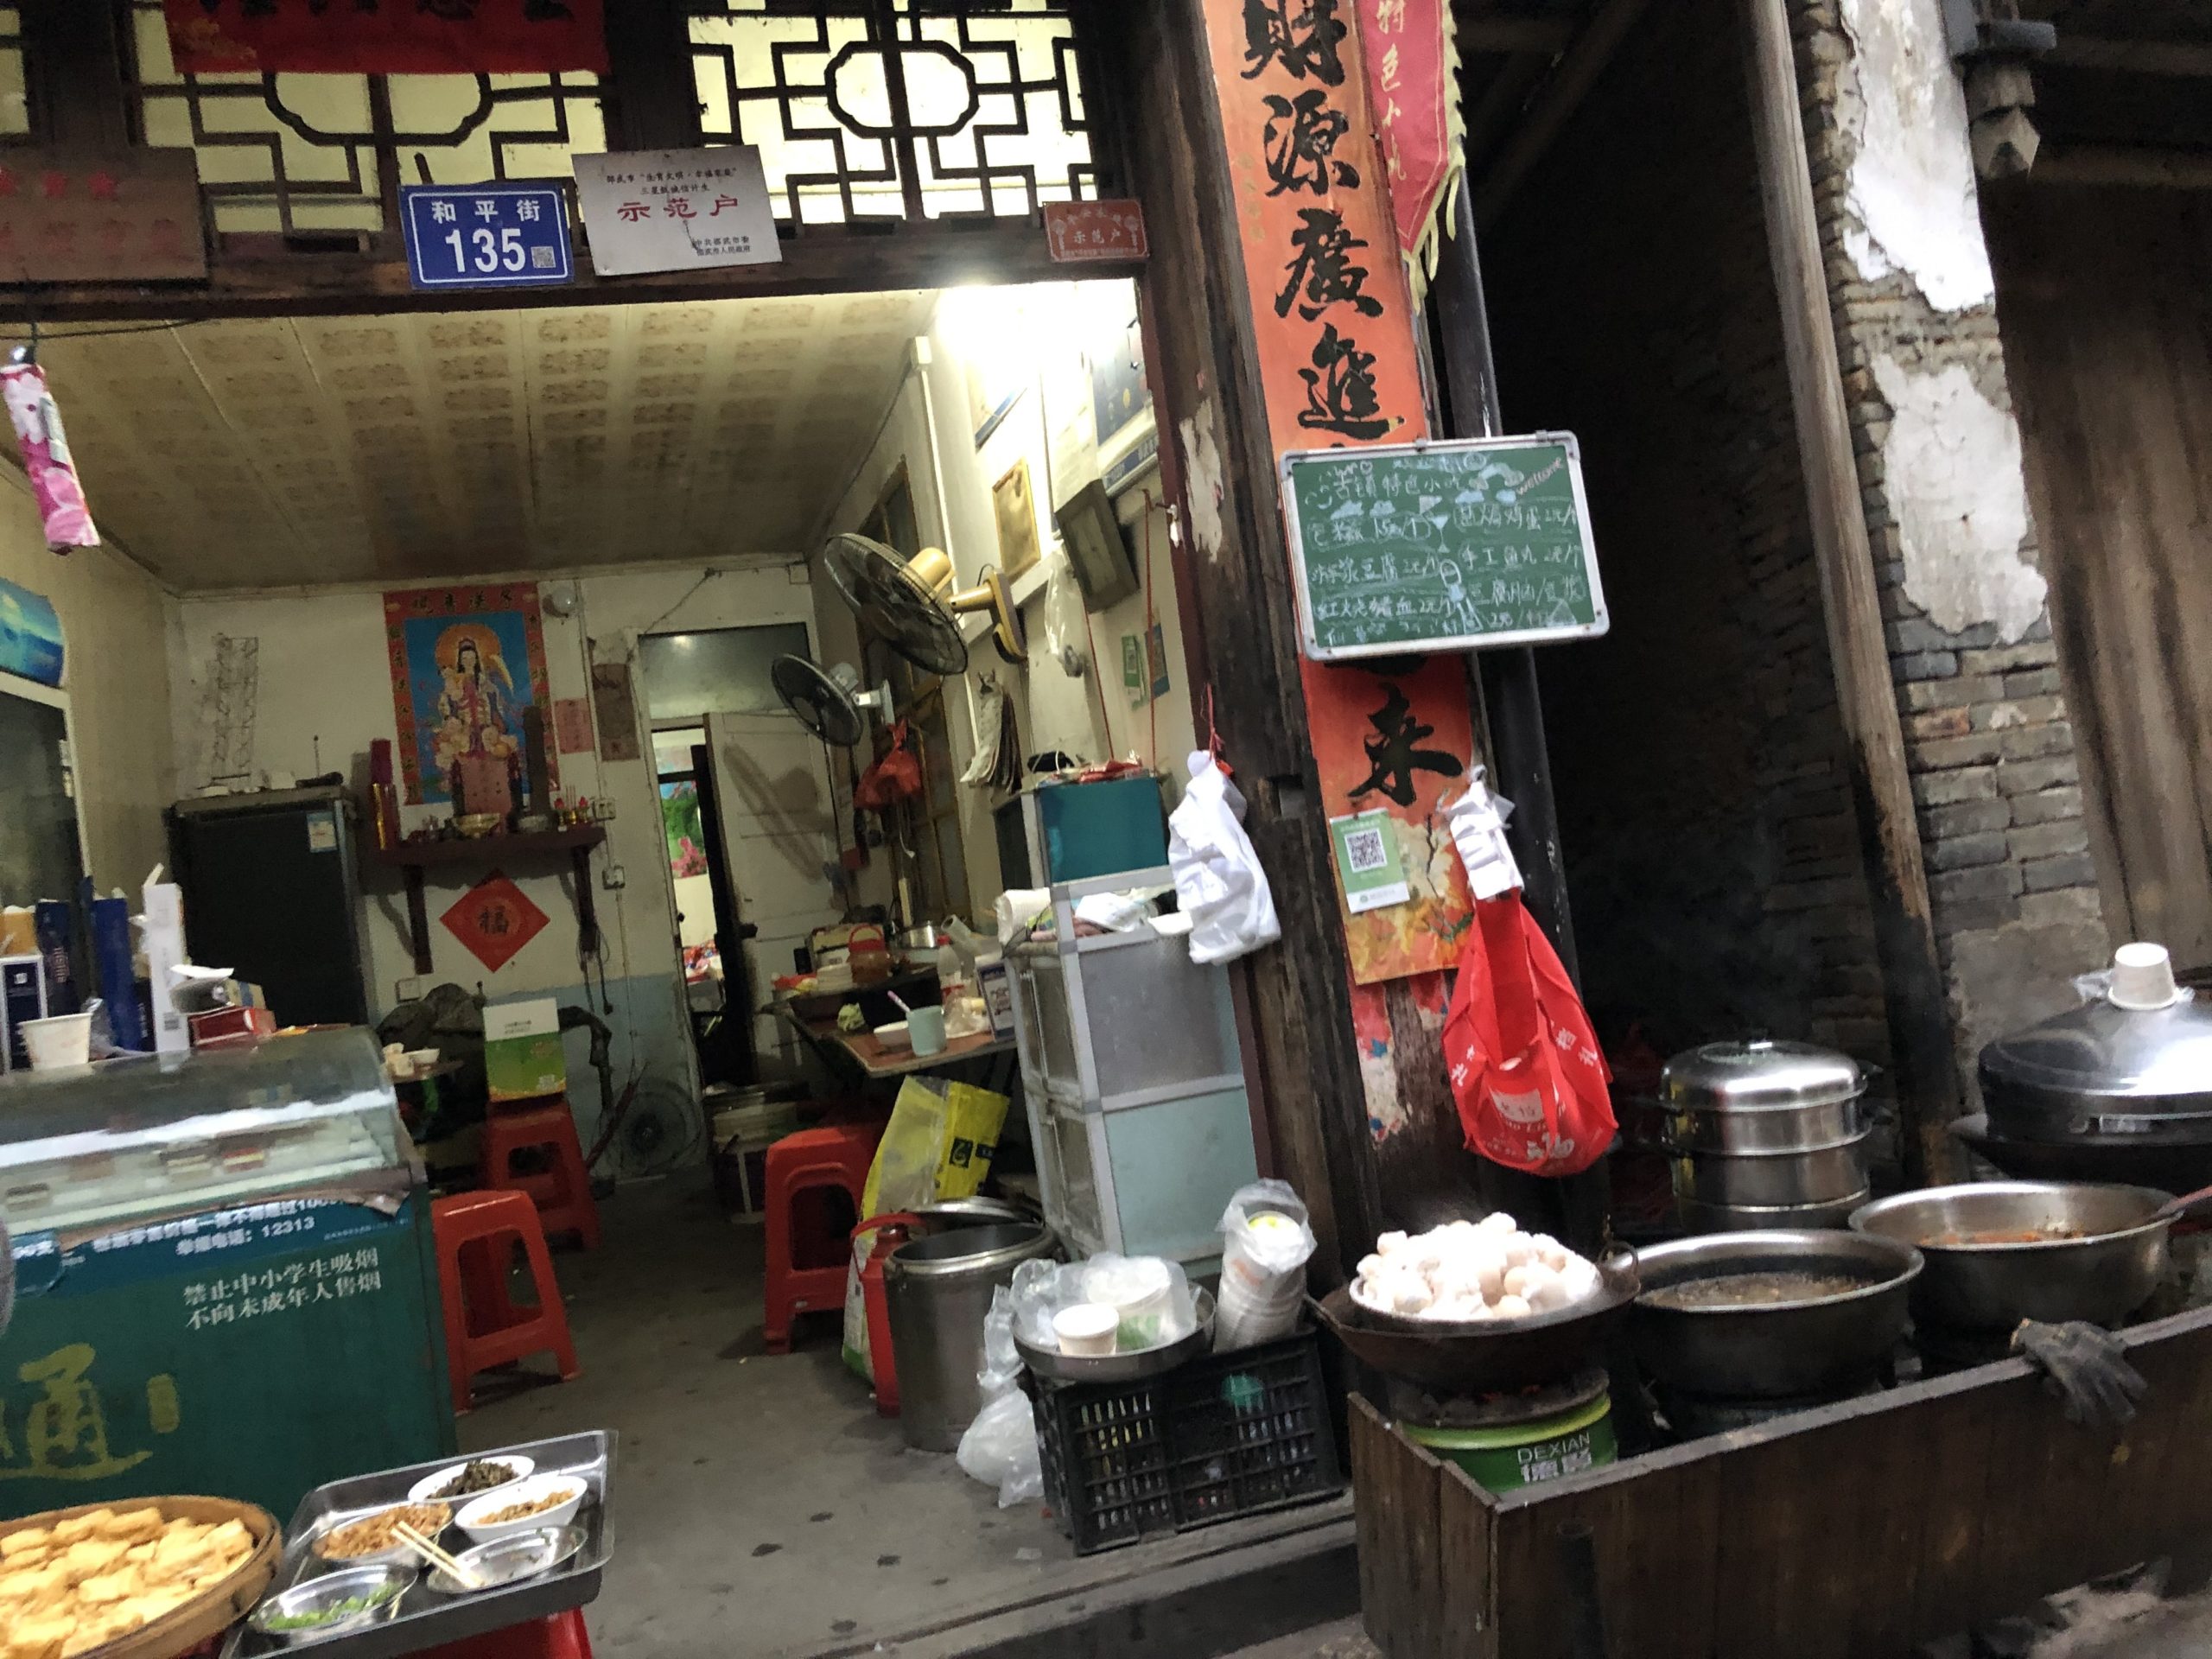 Looking into the tiny cluttered kitchen of a streetside tofu restaurant.